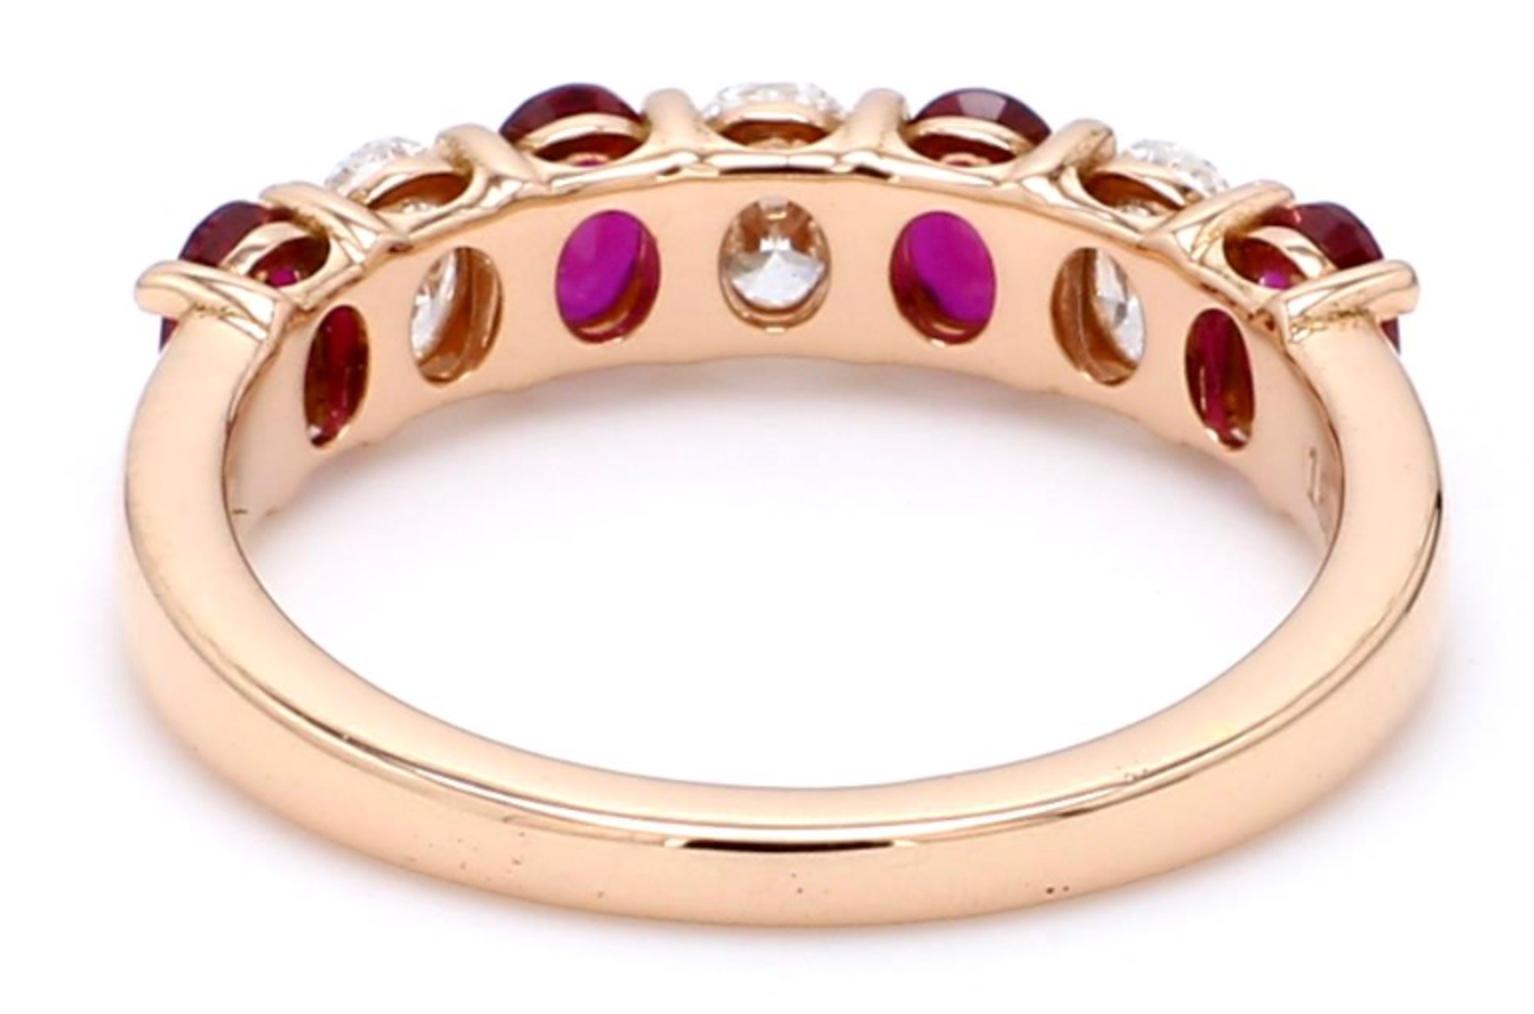 A Beautiful Handcrafted Ring in 18 Rose Karat Yellow Gold with Natural Brilliant Cut Oval Diamond and No Heat Mozambique Mined Rubies . A perfect Wedding Ring for the Special occasion. 

Natural Diamond Details
Pieces : 3 Pieces
Weight : 0.55 Carat